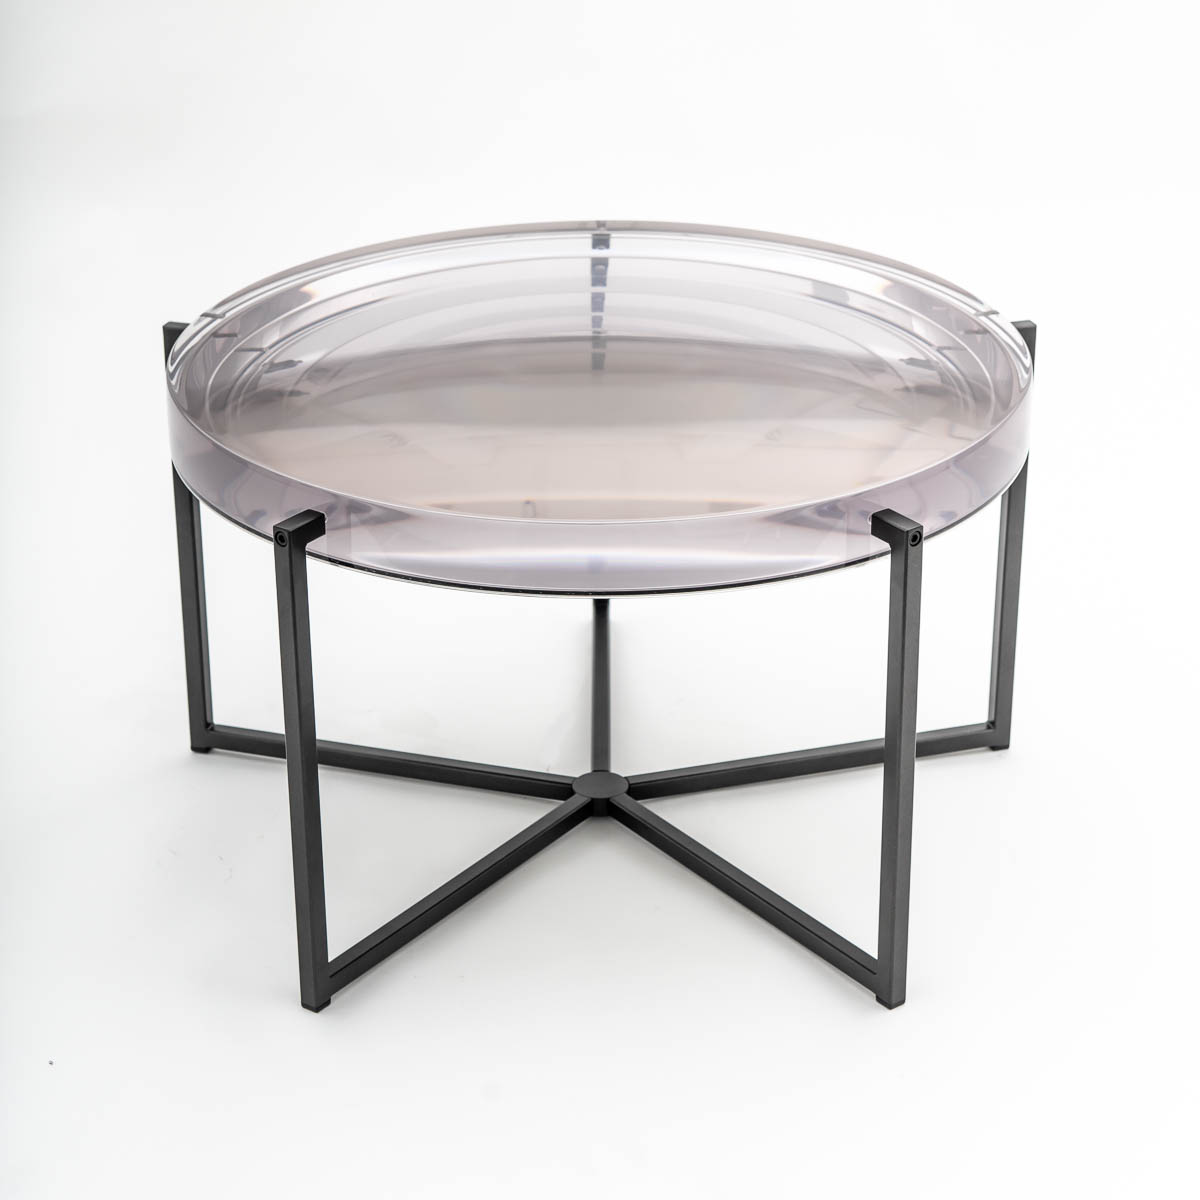 High end luxury coffee table made of resin,